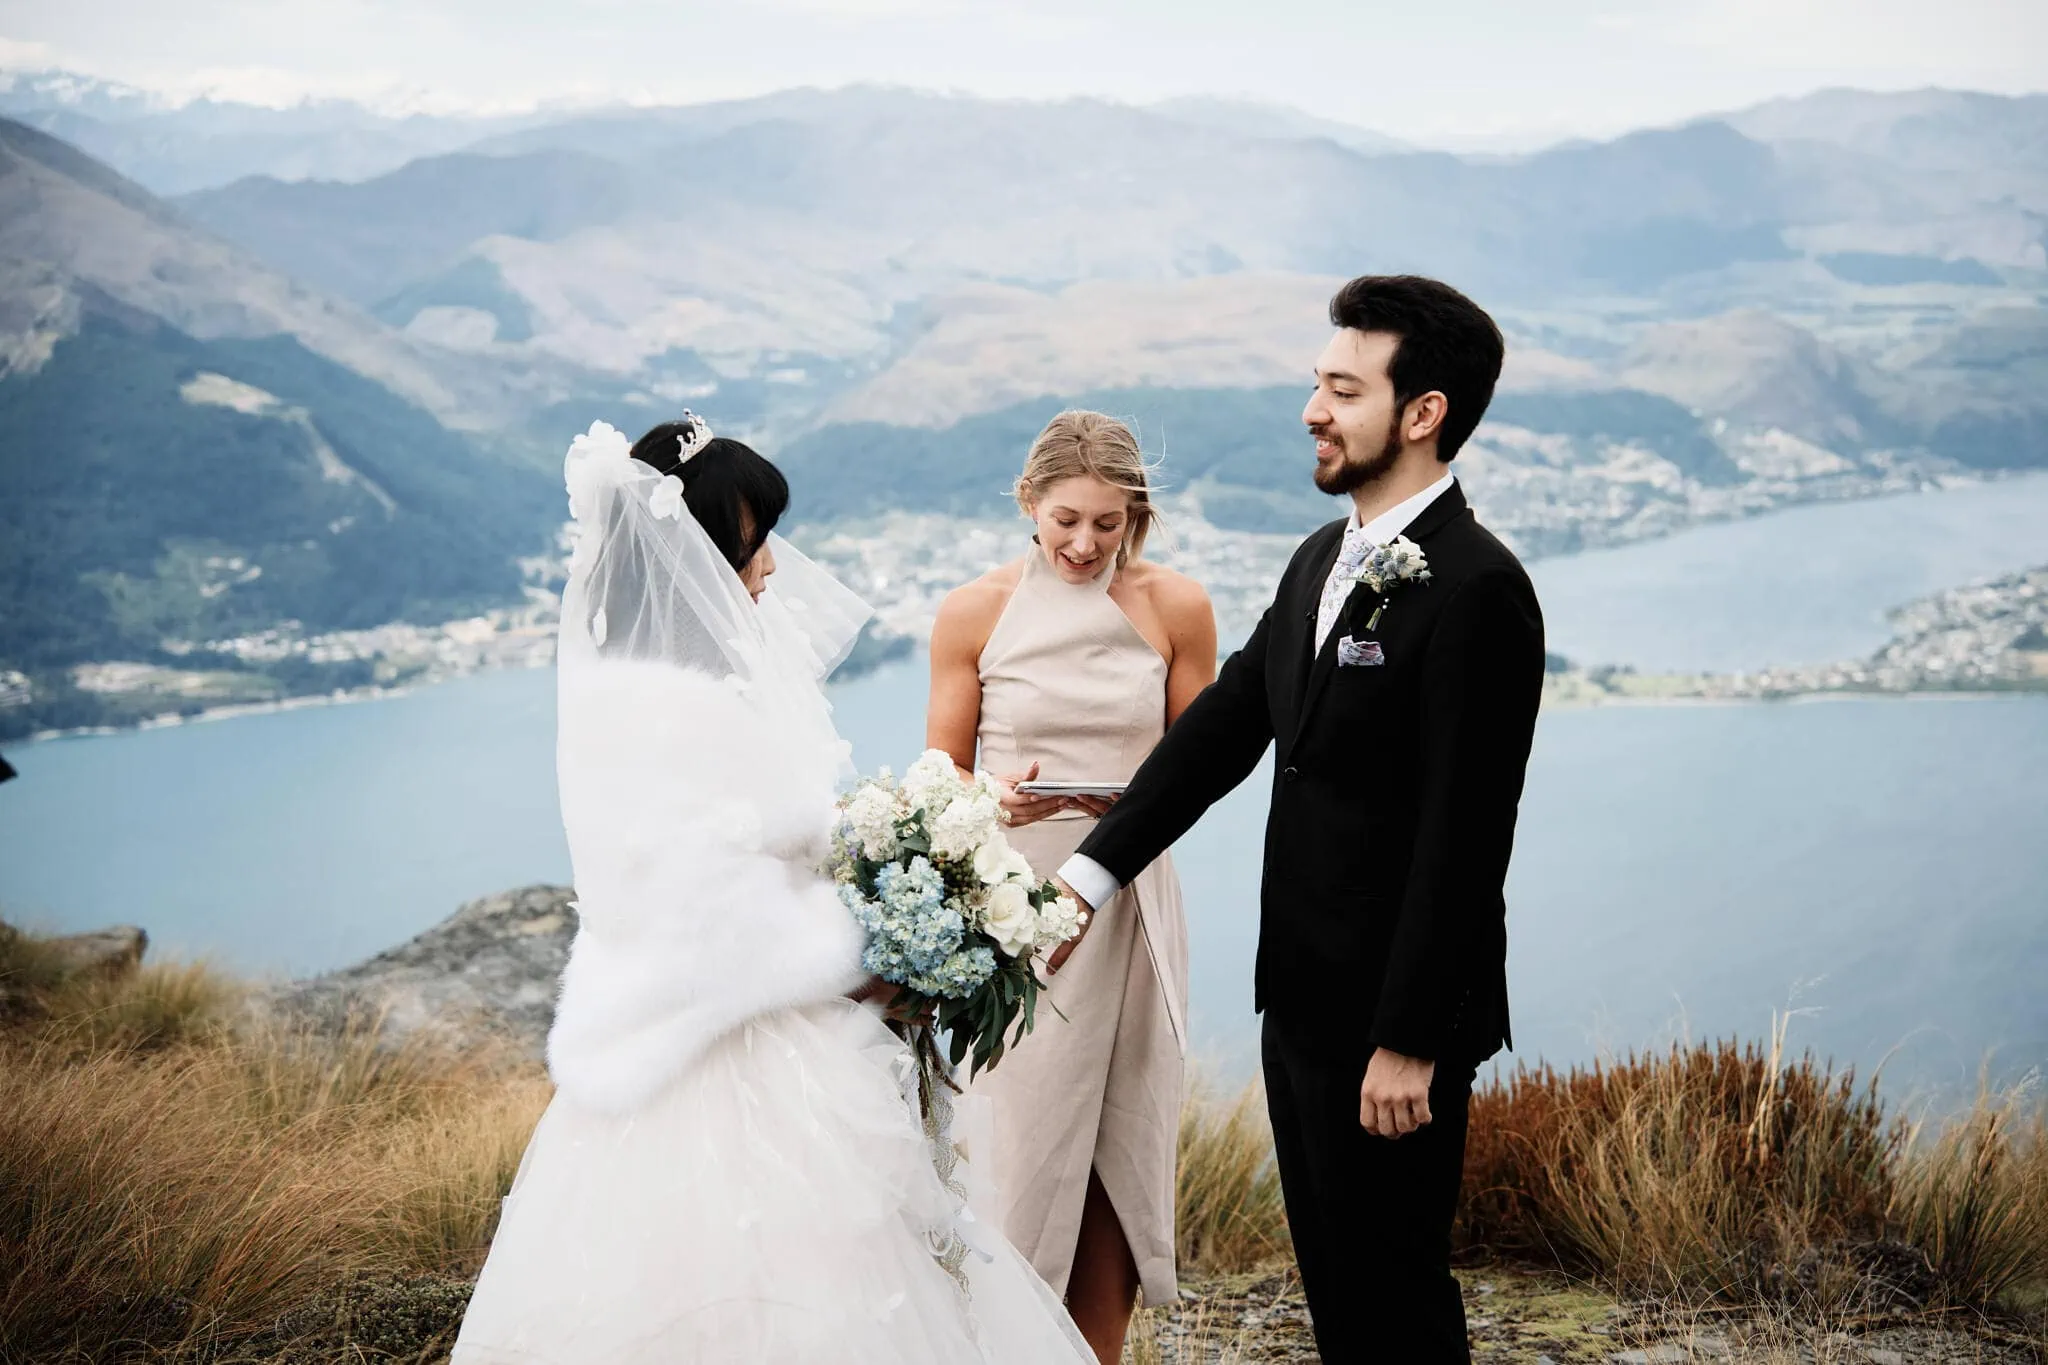 Carlos and Wanzhu have an intimate Cecil Peak heli elopement wedding on top of a mountain in Queenstown, New Zealand.